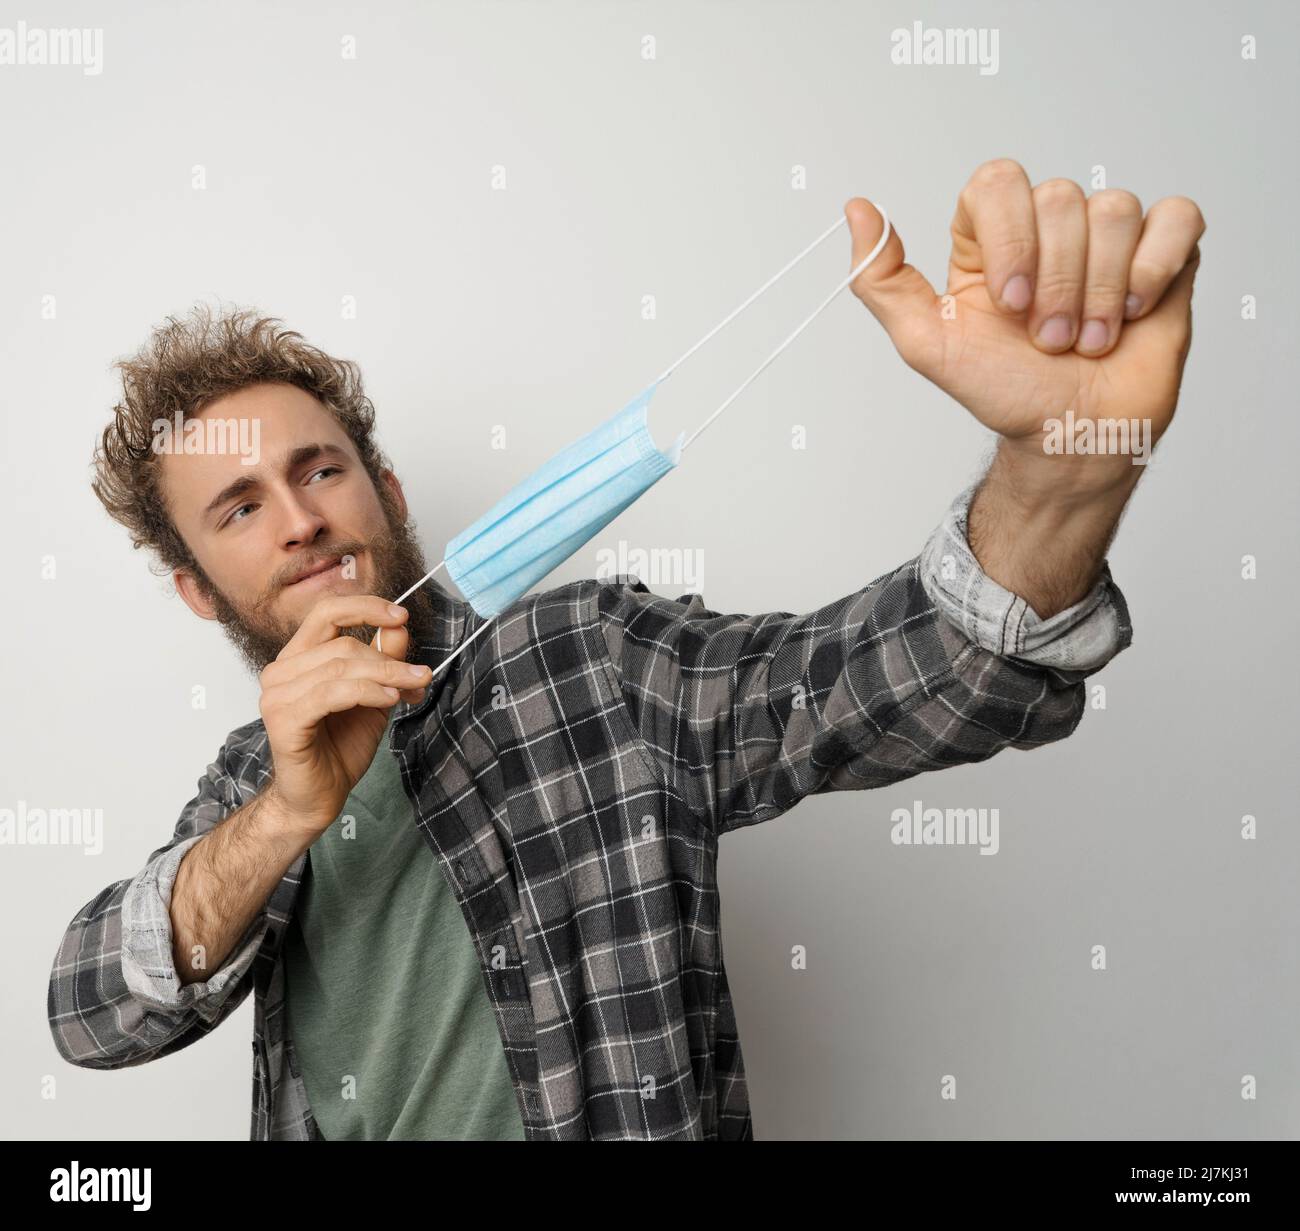 Tired of face mask young man in plaid shirt pops it in the air. Happy handsome anti mask guy. Exhausted young man trying to rid of medical mask. Health care concept. Covid 19 concept. Stock Photo